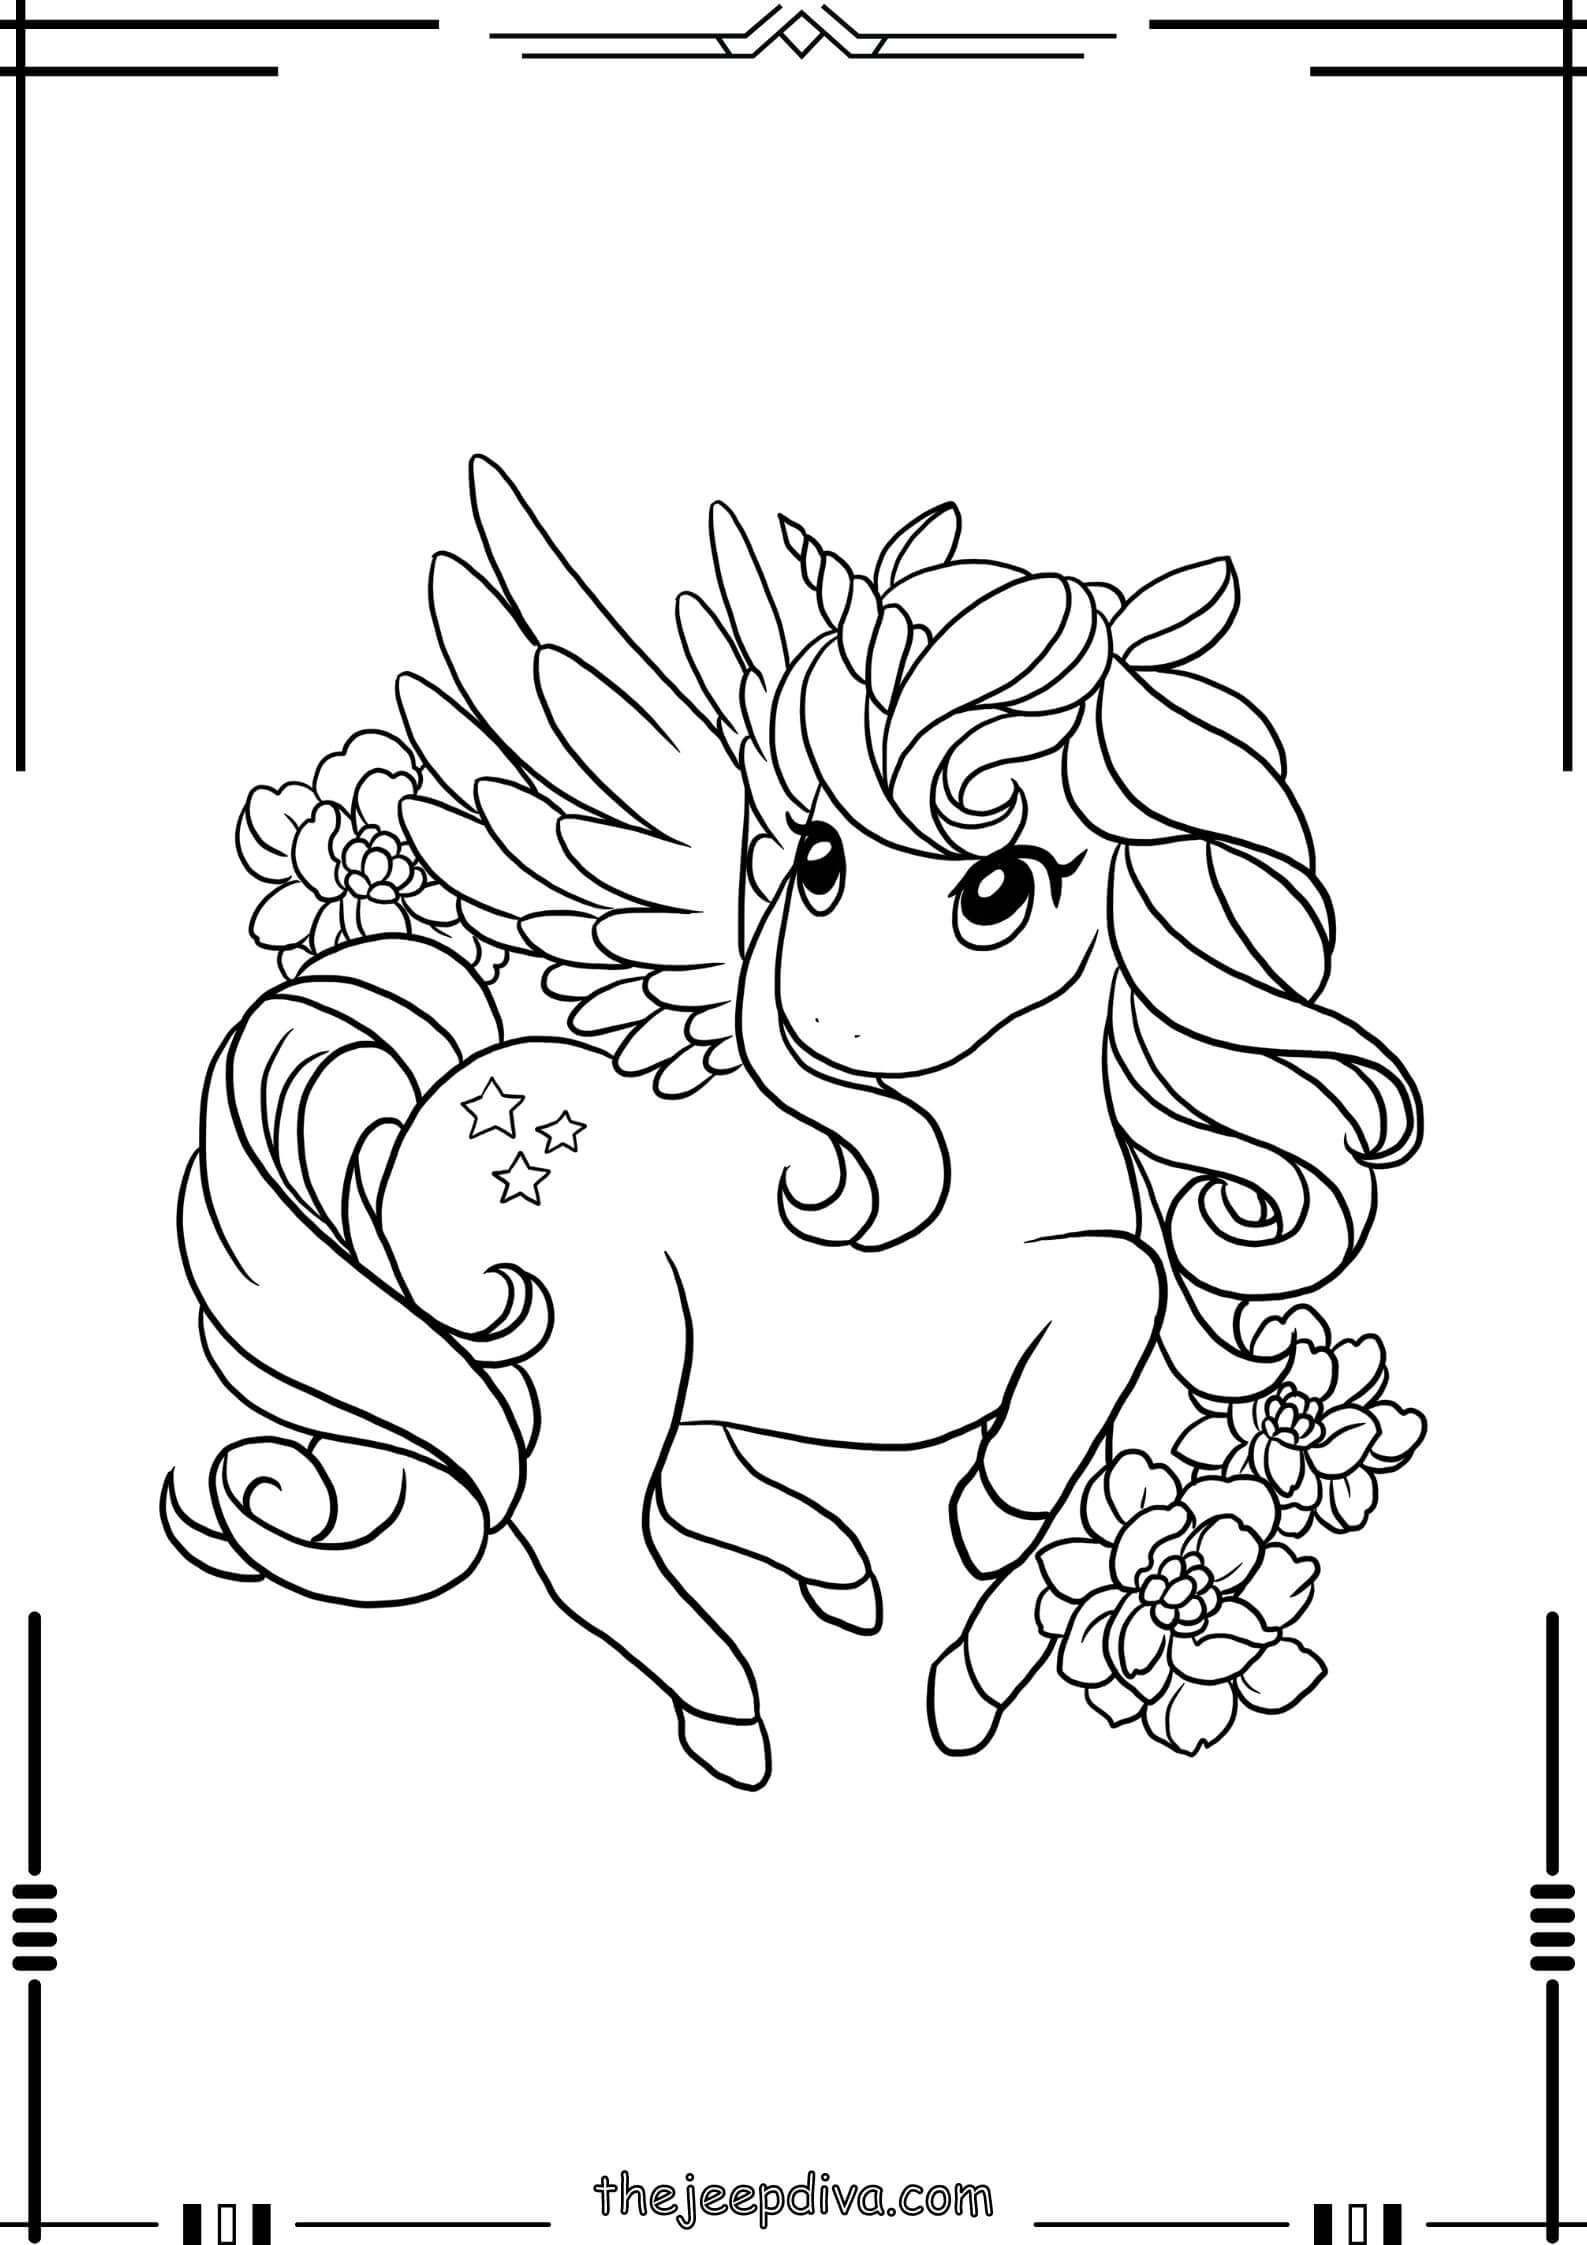 unicorn-coloring-page-easy-17